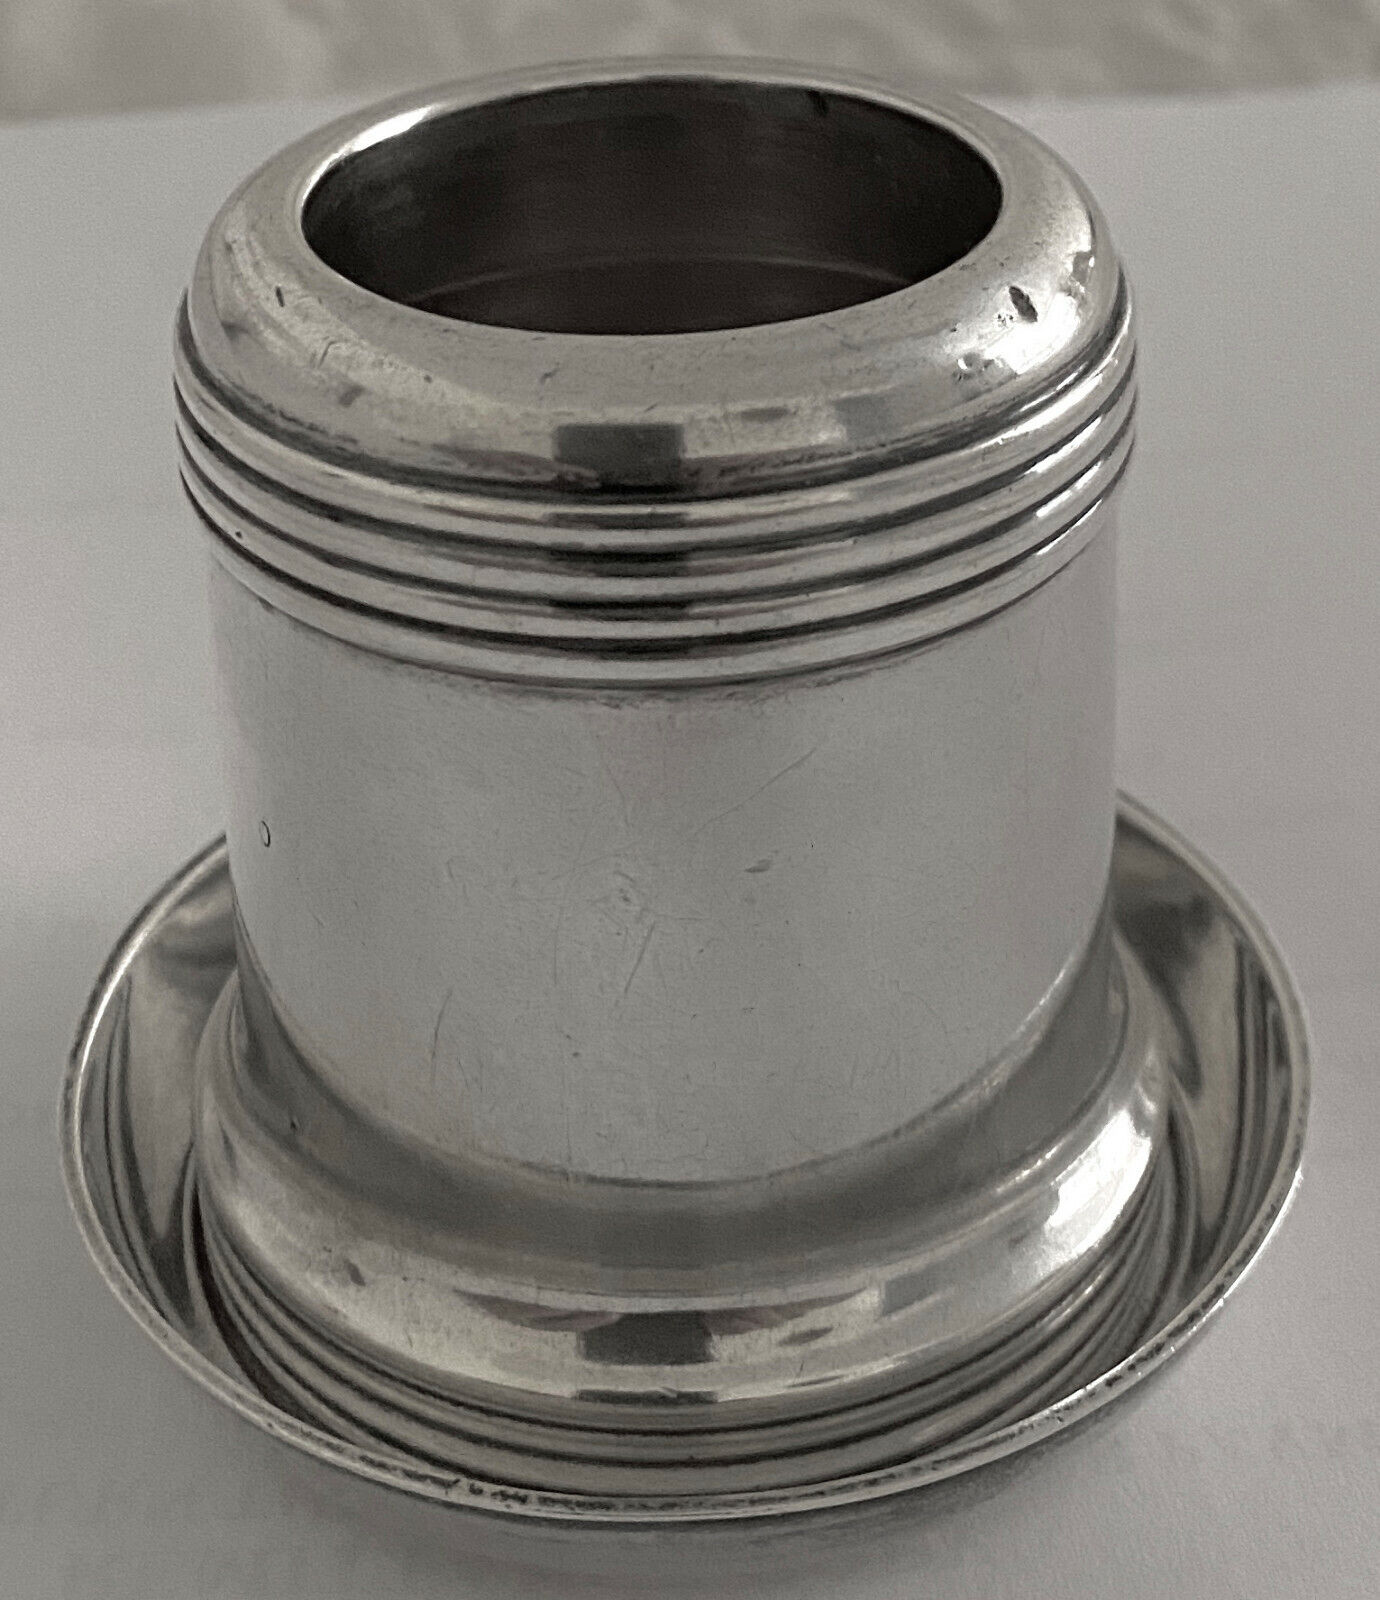 TIFFANY & CO. SILVER DECORATIVE VESSEL WITH HOLDING BOTTOM TRAY STERLING SILVER